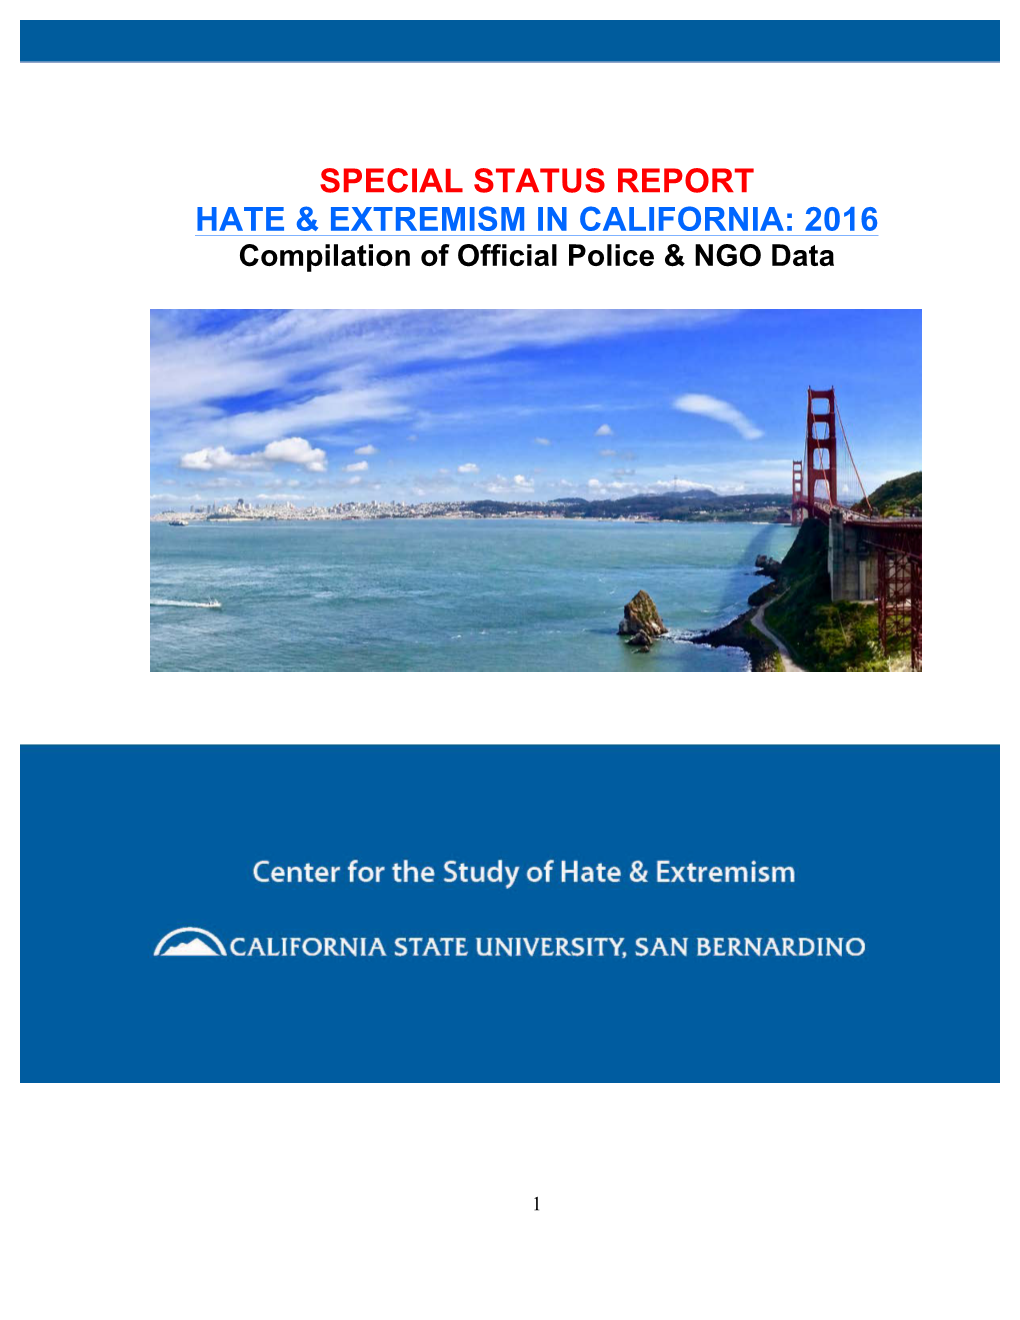 Special Status Report Hate & Extremism in California: 2016